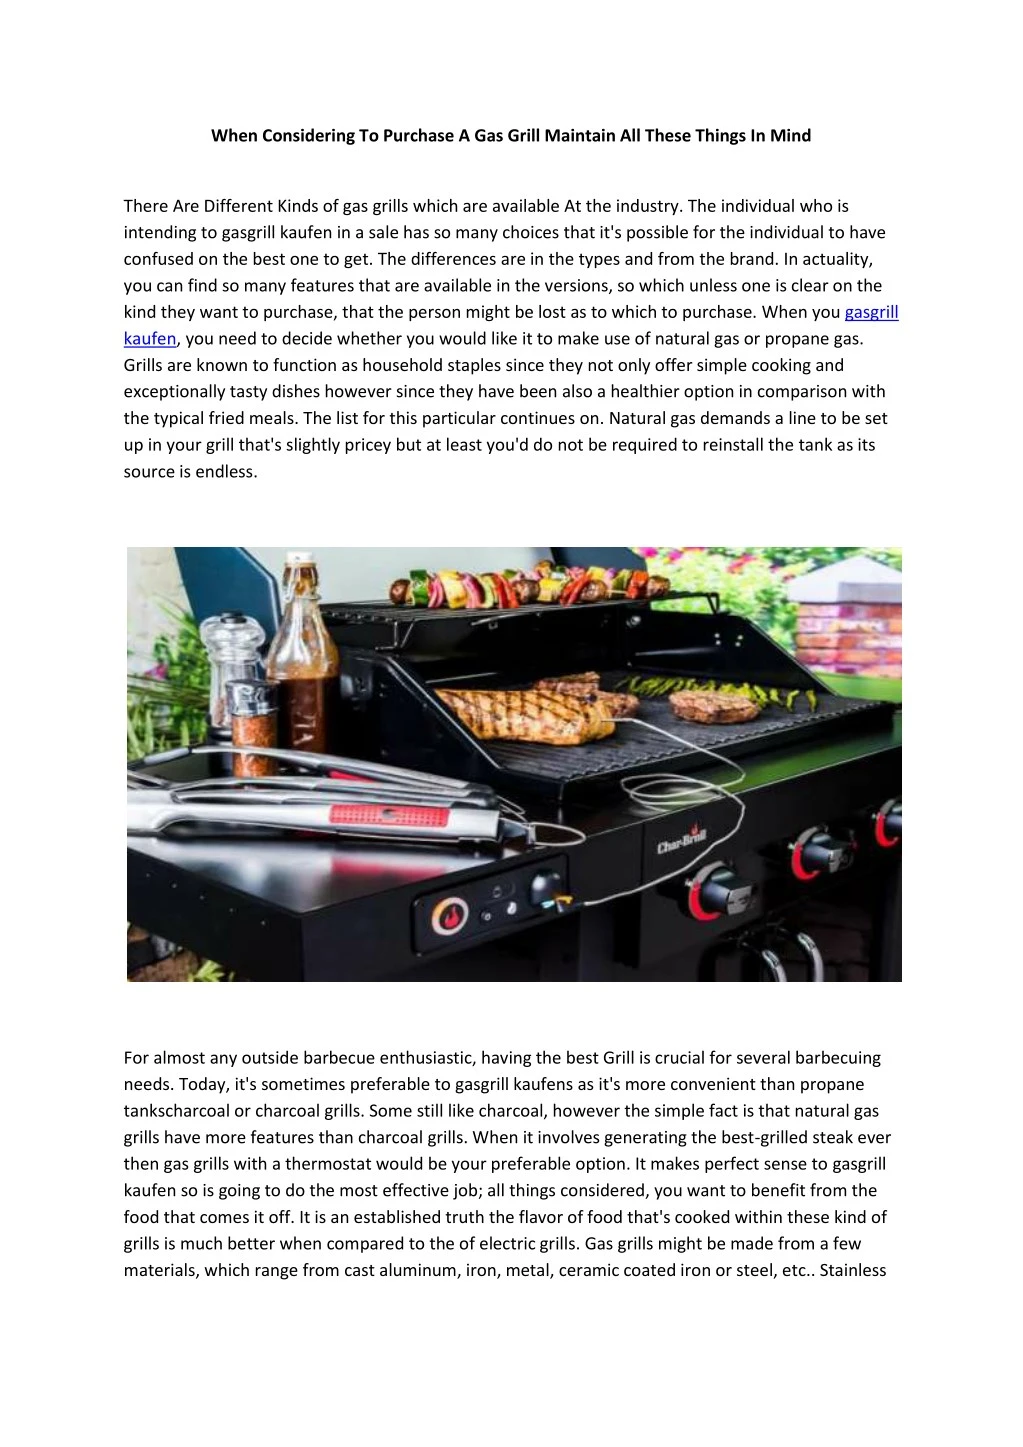 when considering to purchase a gas grill maintain